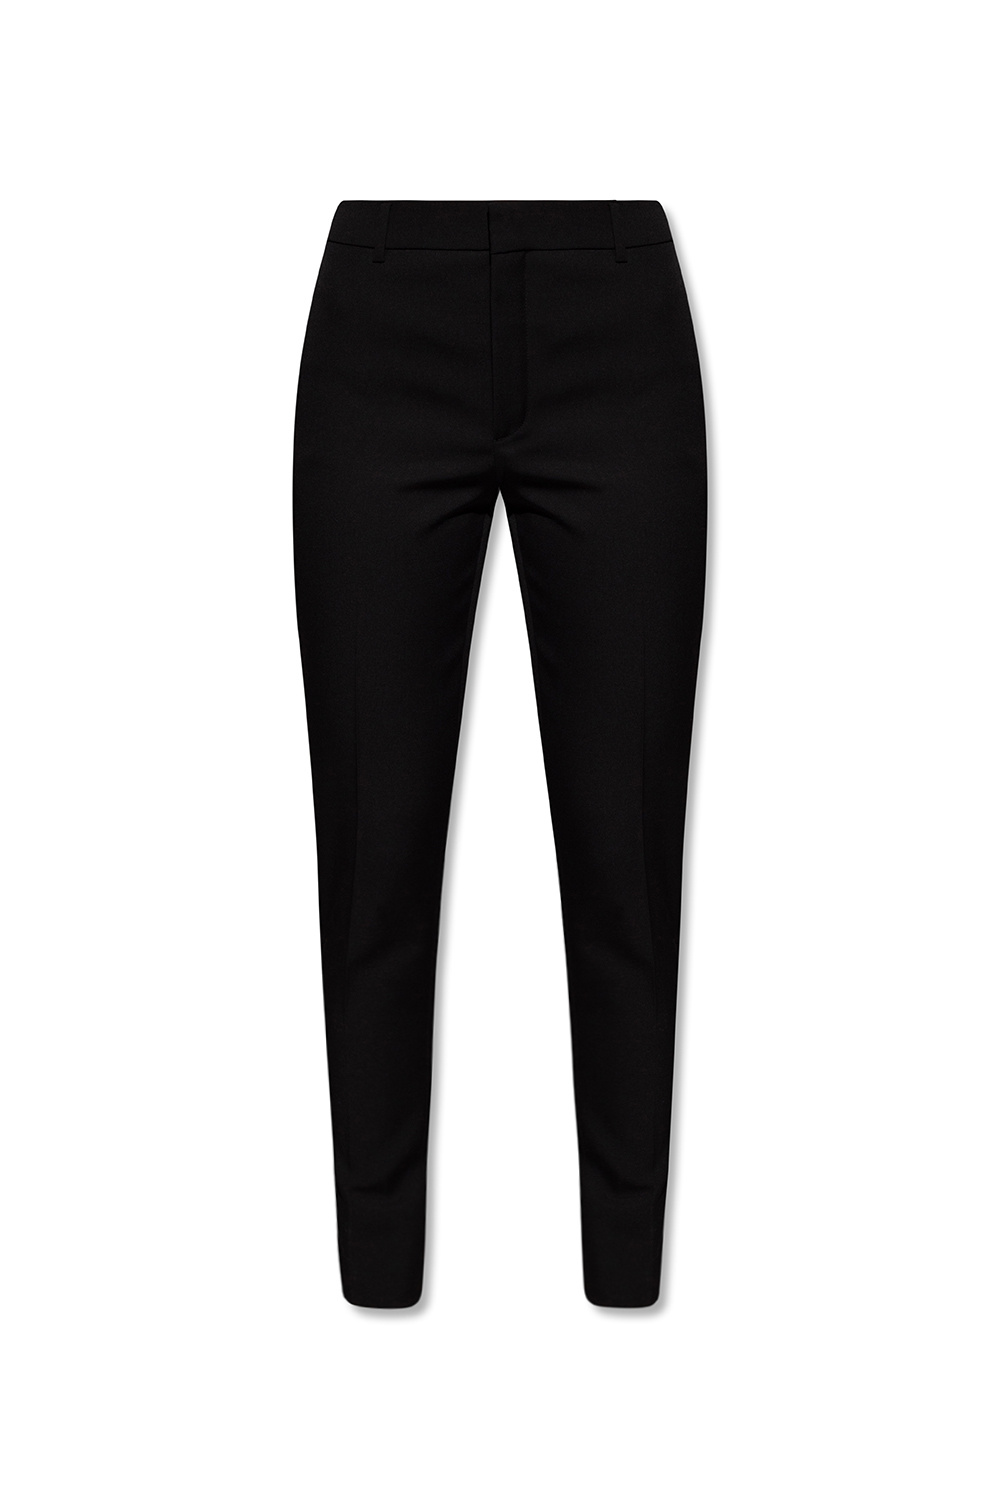 Saint Laurent Trousers with side stripes | Women's Clothing 